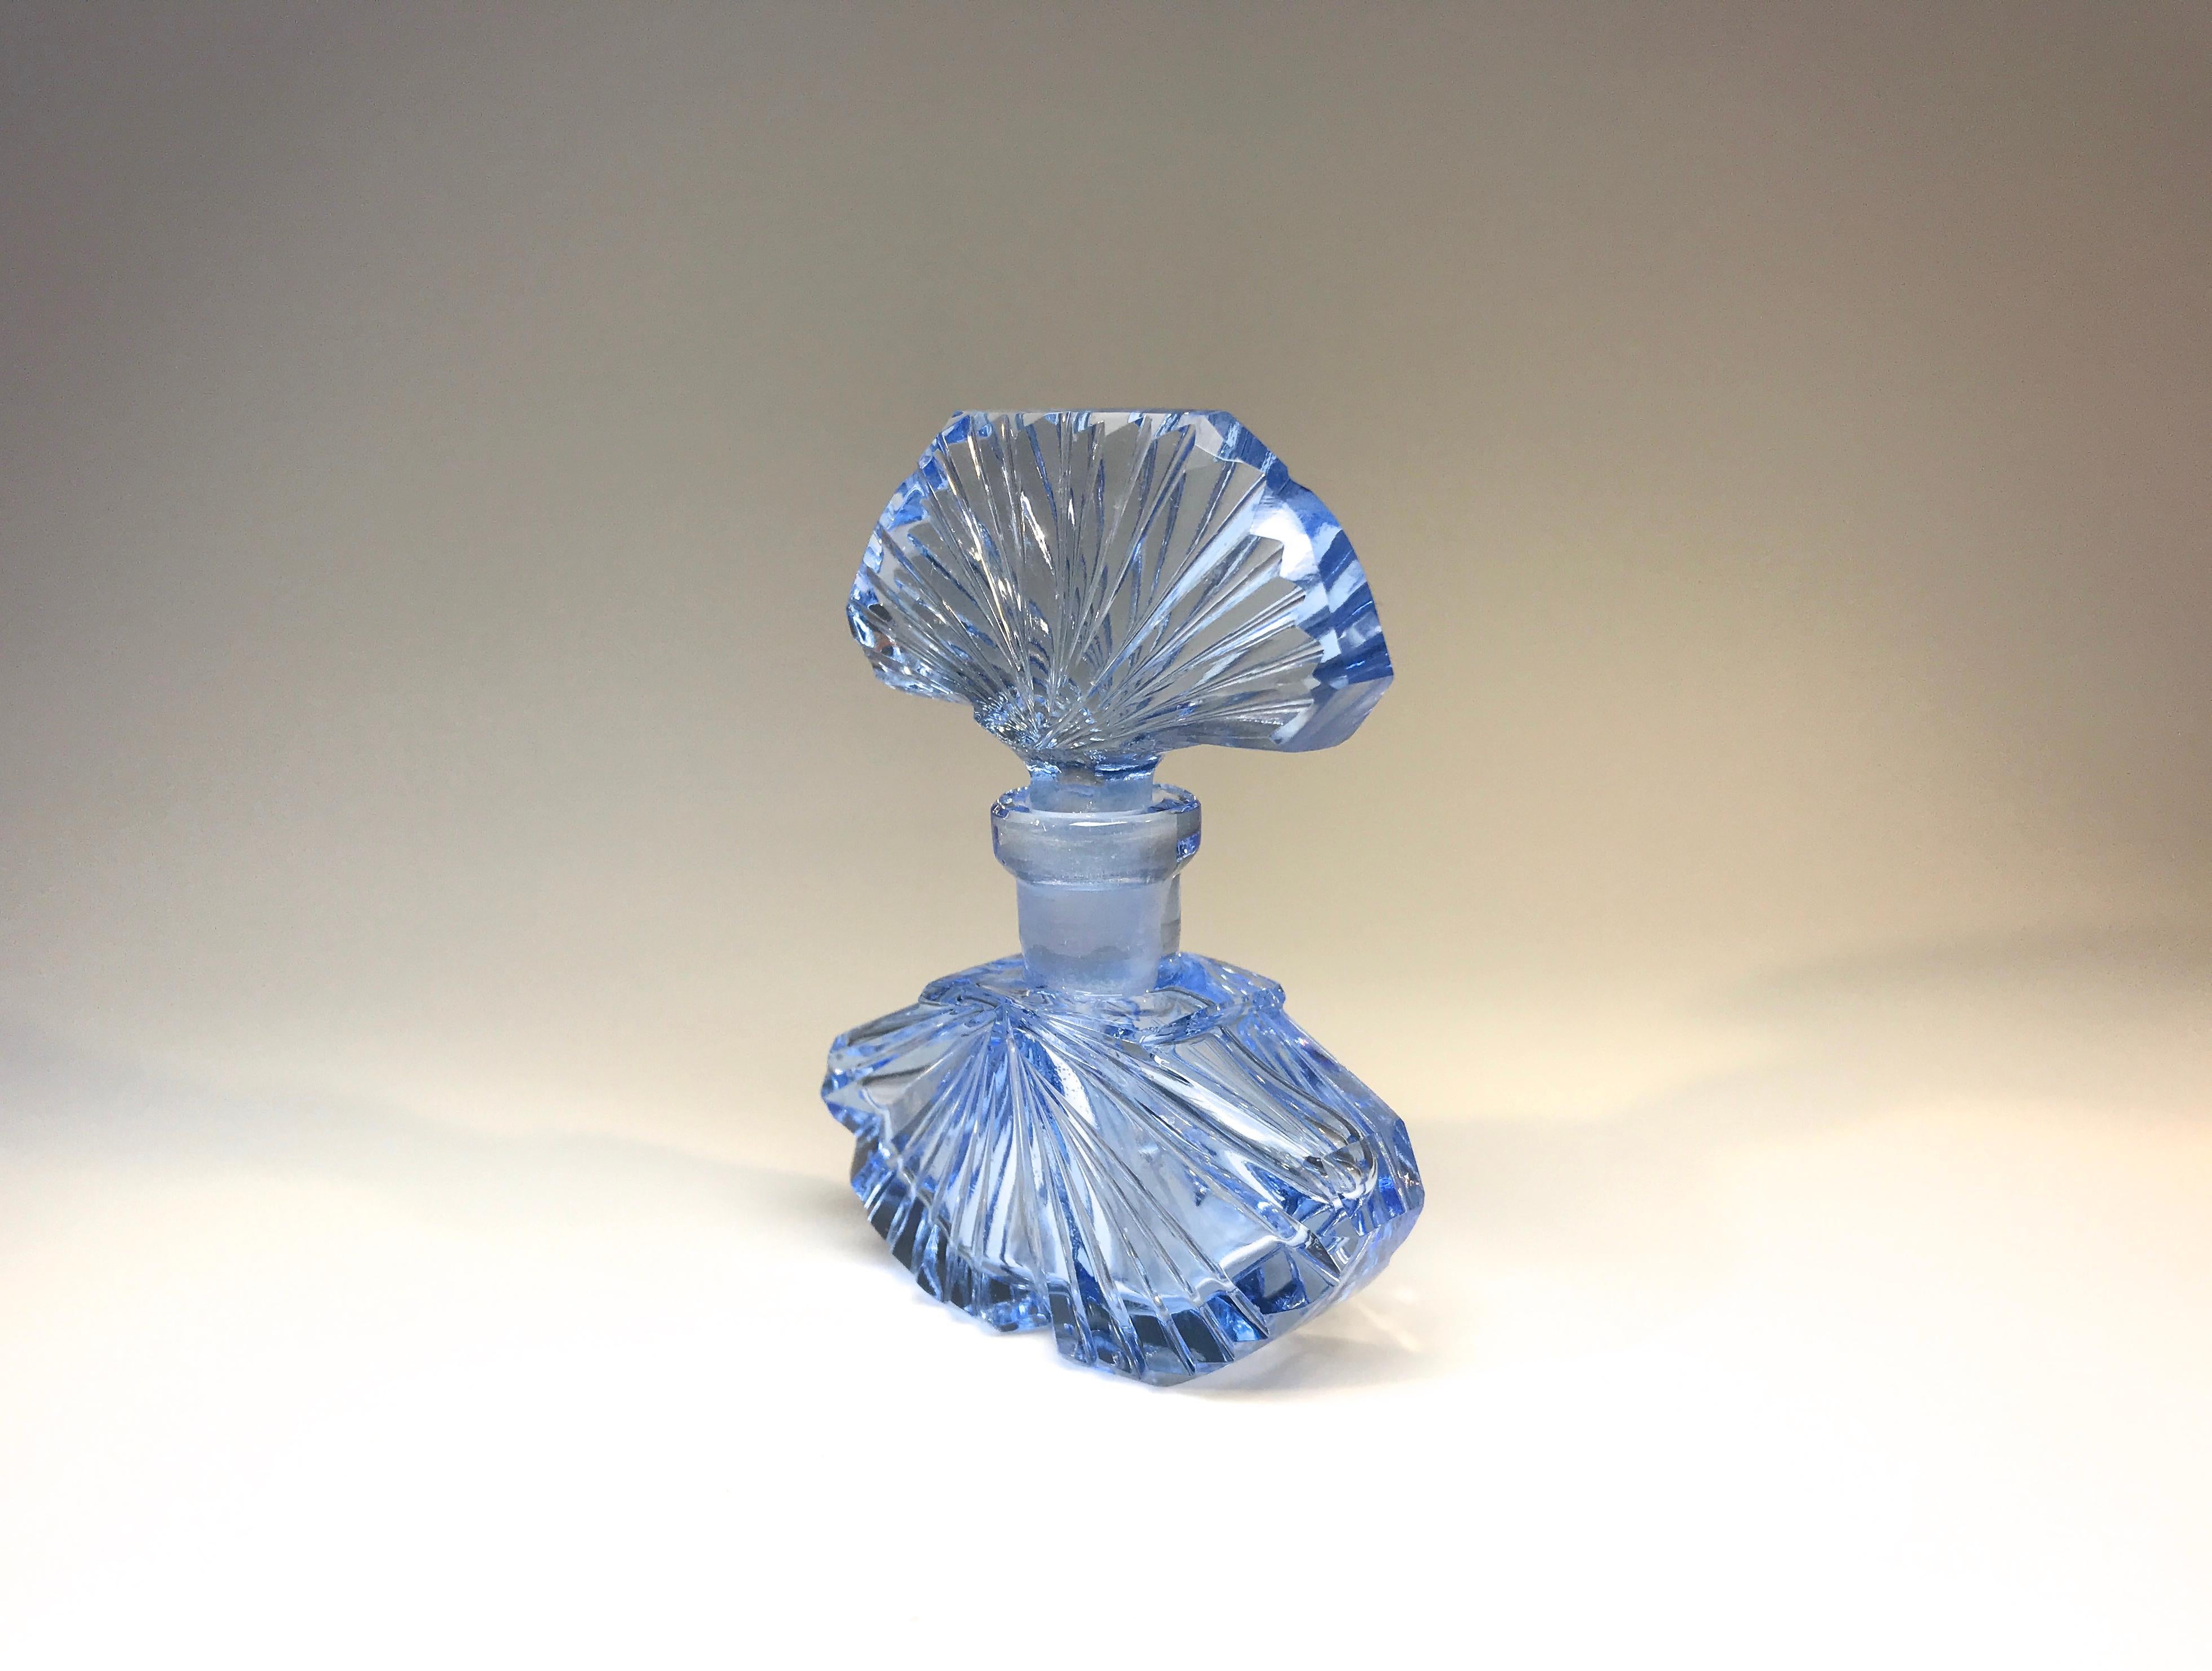 An absolutely delightful antique forget me not blue, crystal fan shaped perfume bottle
petite bohemia Czech crystal bottle, complete with matching glass stopper and delicate scent rod in excellent condition,
circa 1920s
Measures: Height 2.75